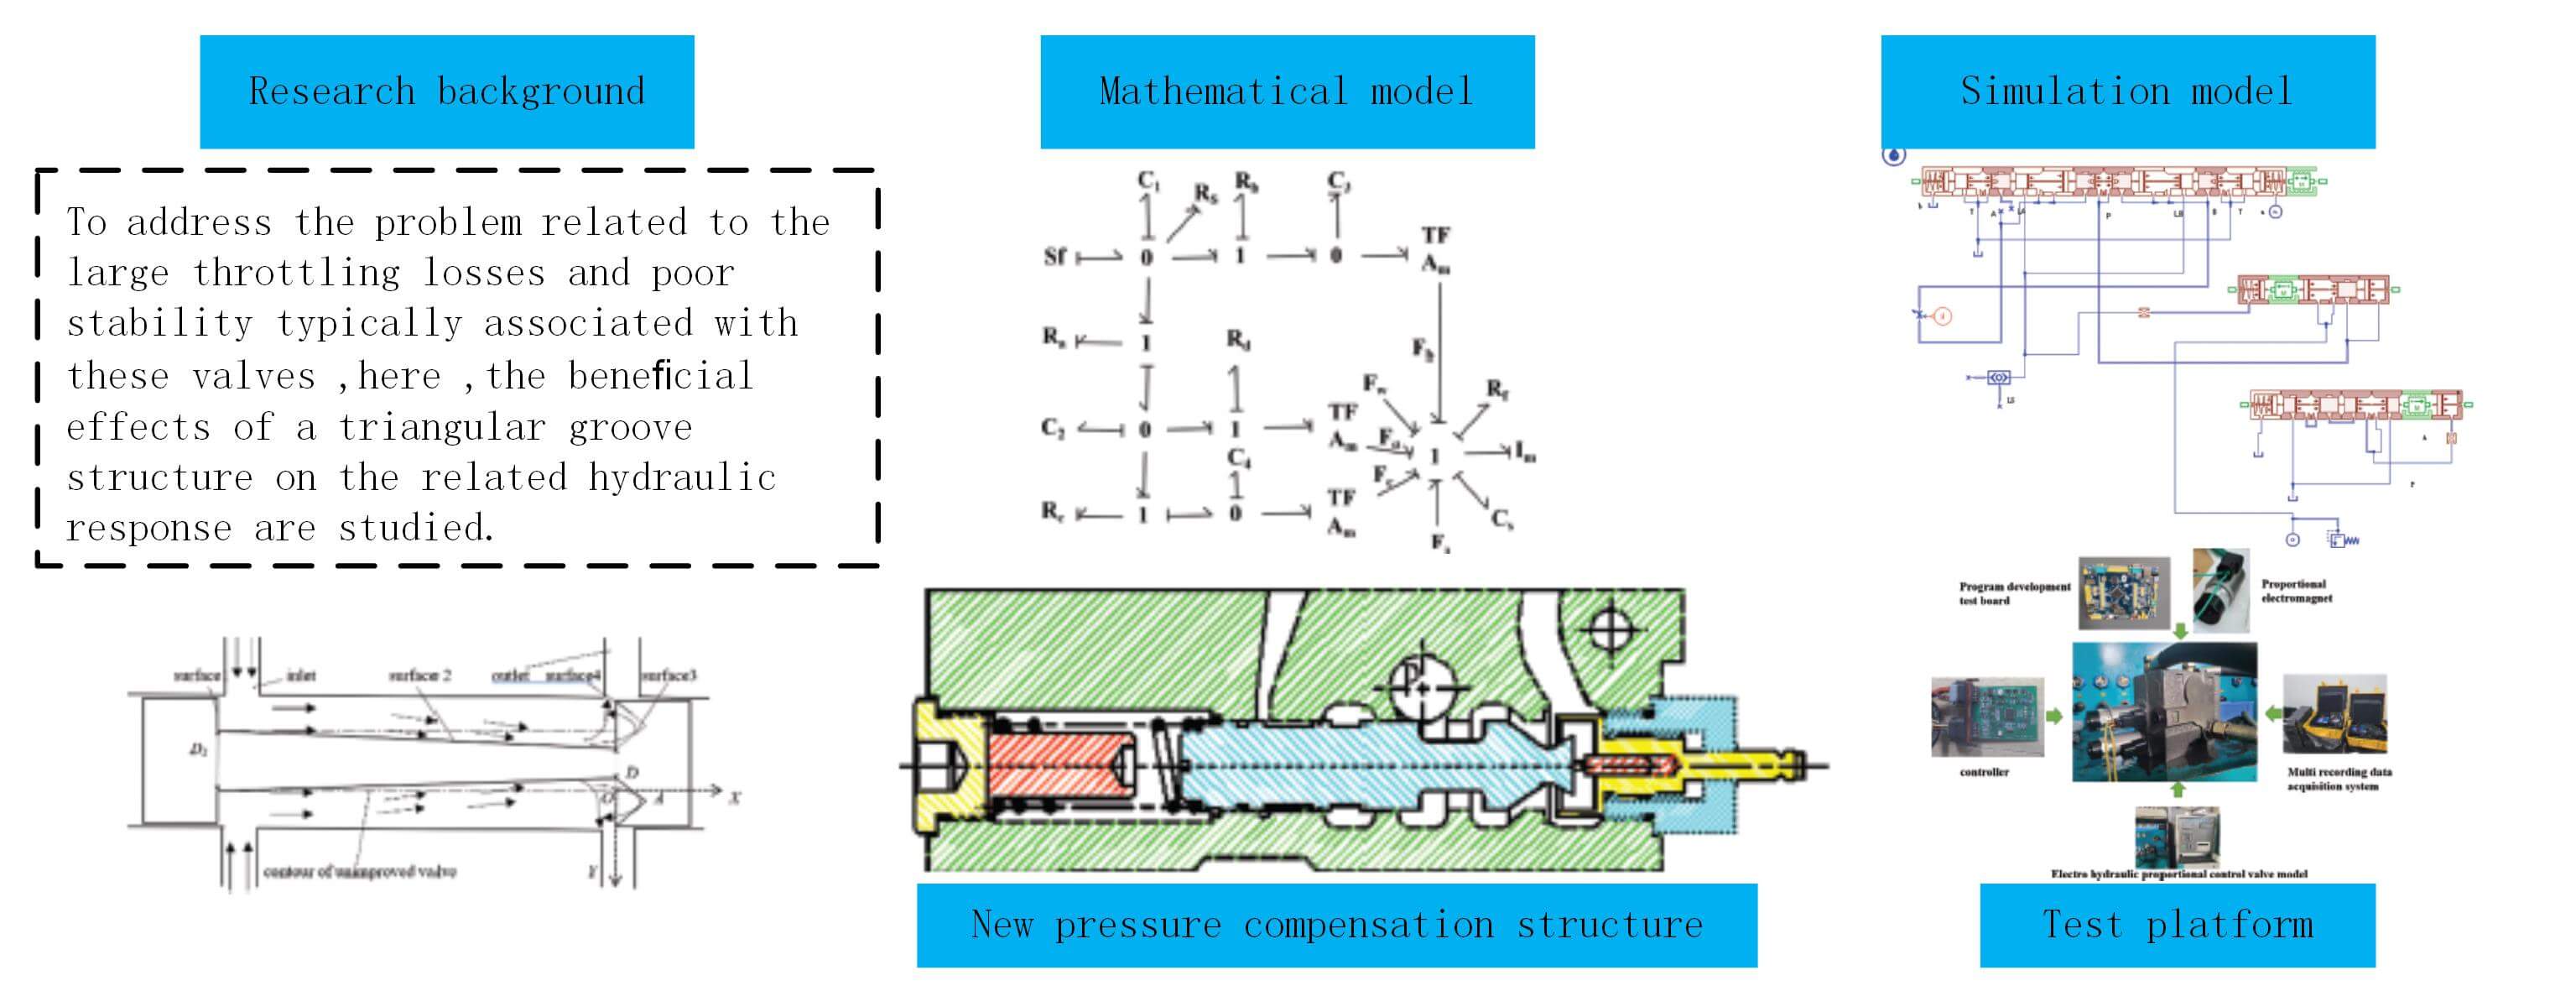 An Analysis of the Static and Dynamic Behavior of the Hydraulic Compensation System of a Multichannel Valve